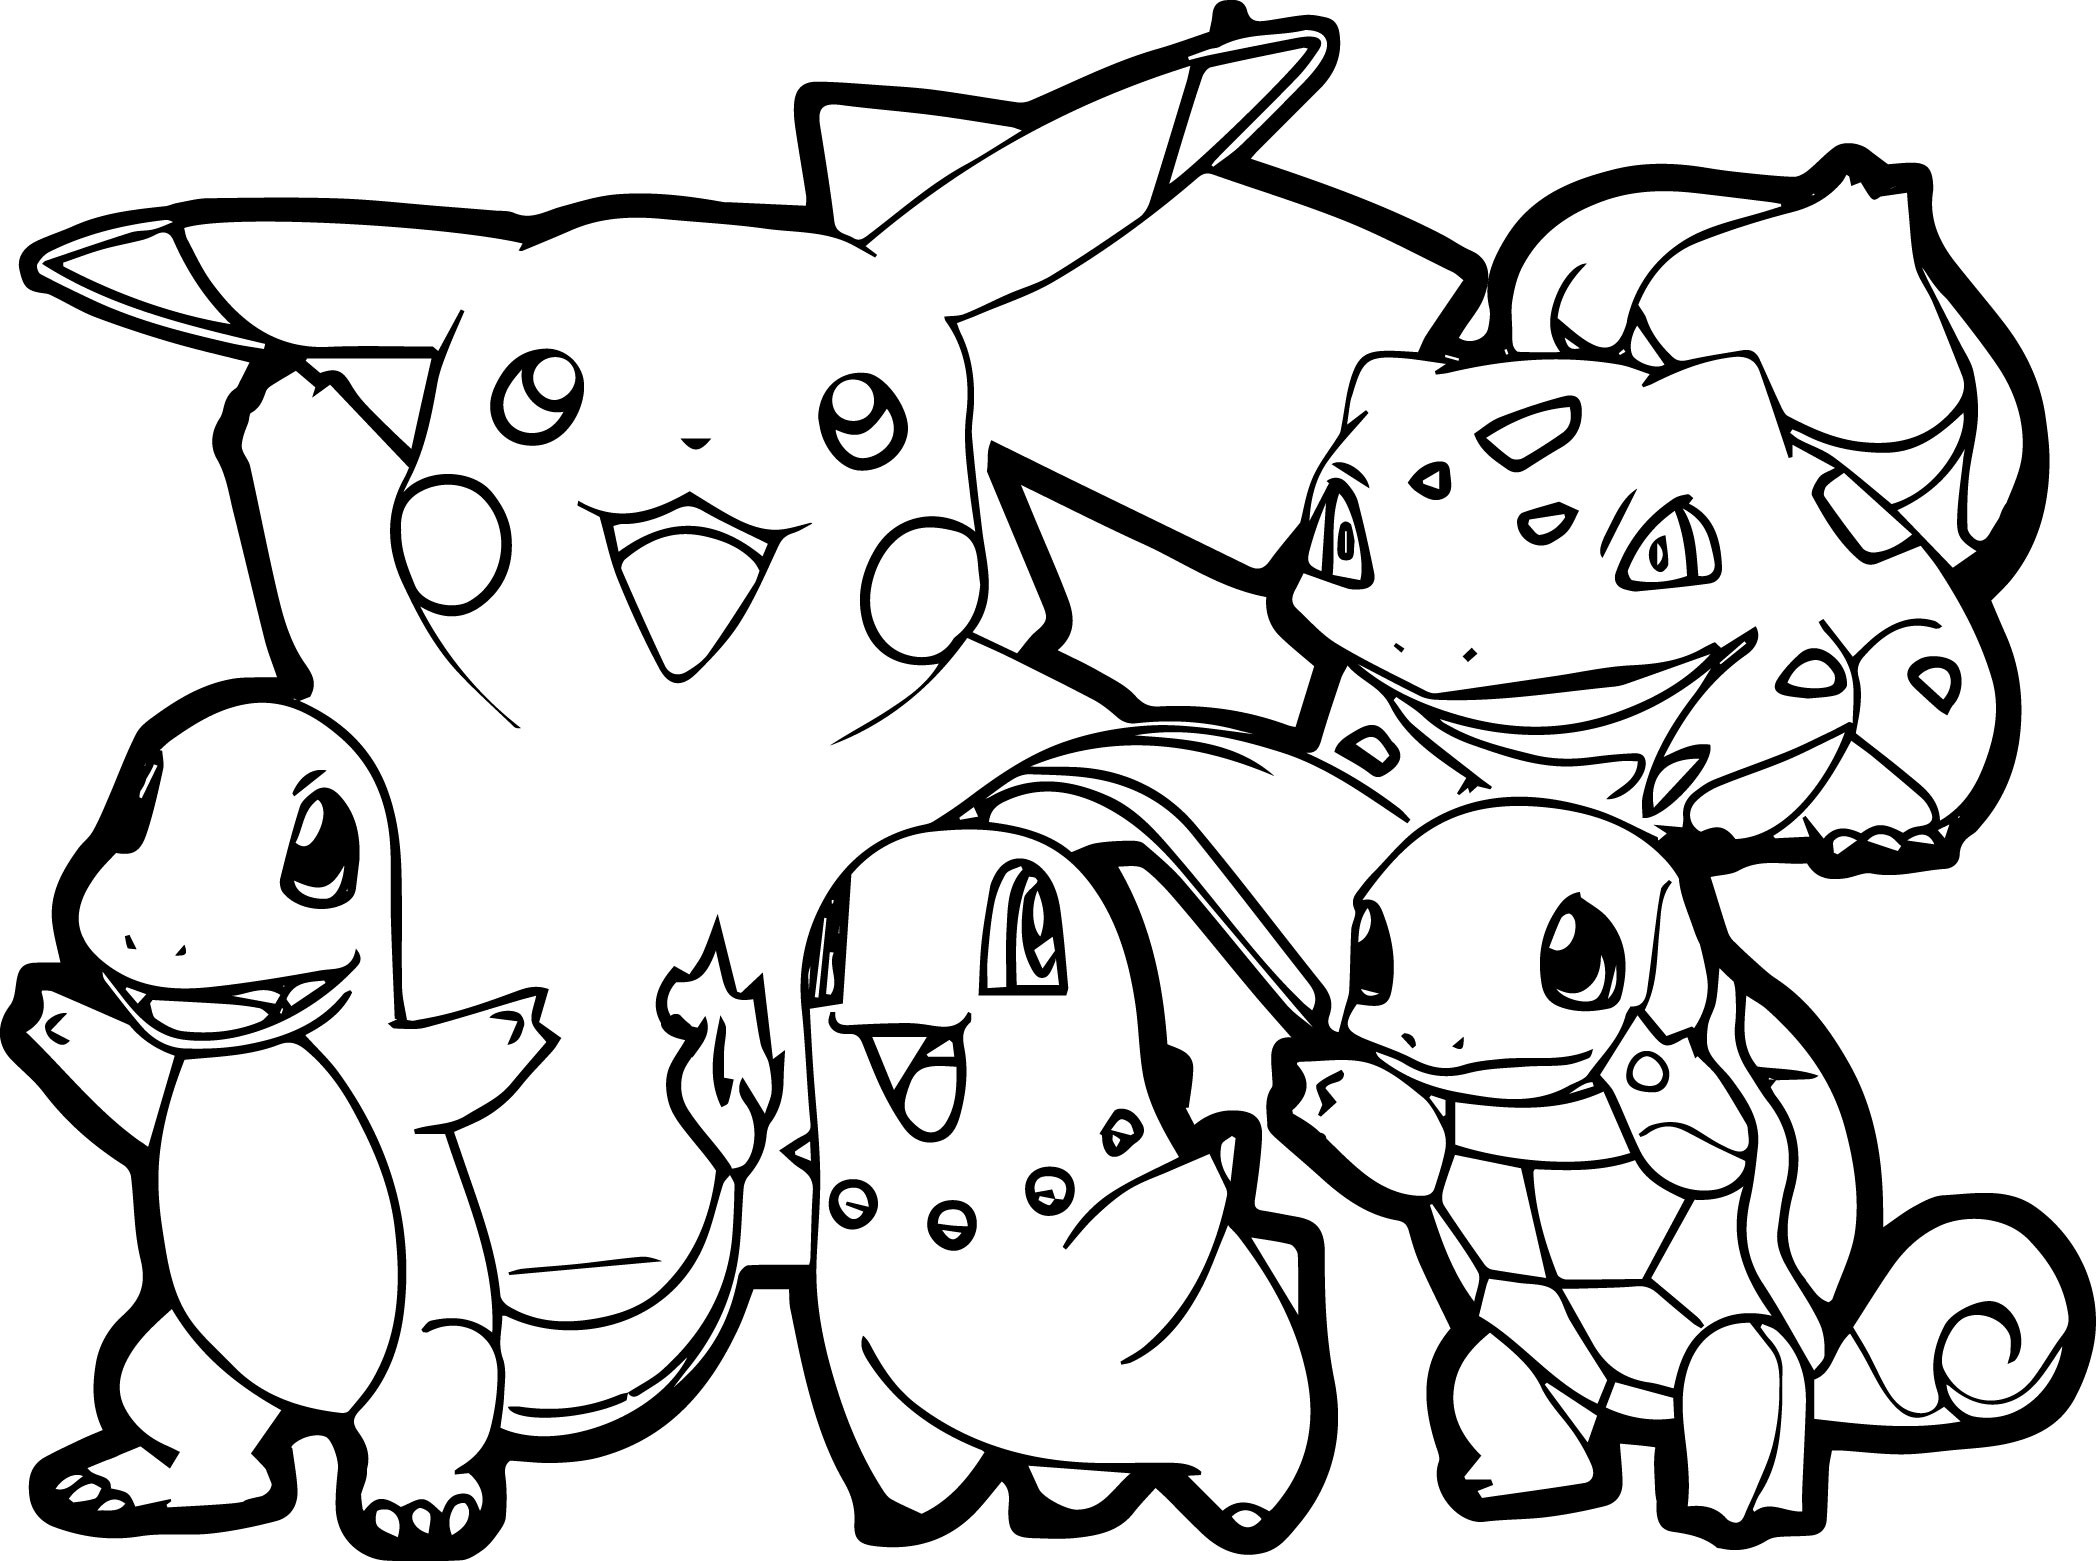 Coloring Pages For Kids Pokemon
 Pokemon for children All Pokemon coloring pages Kids